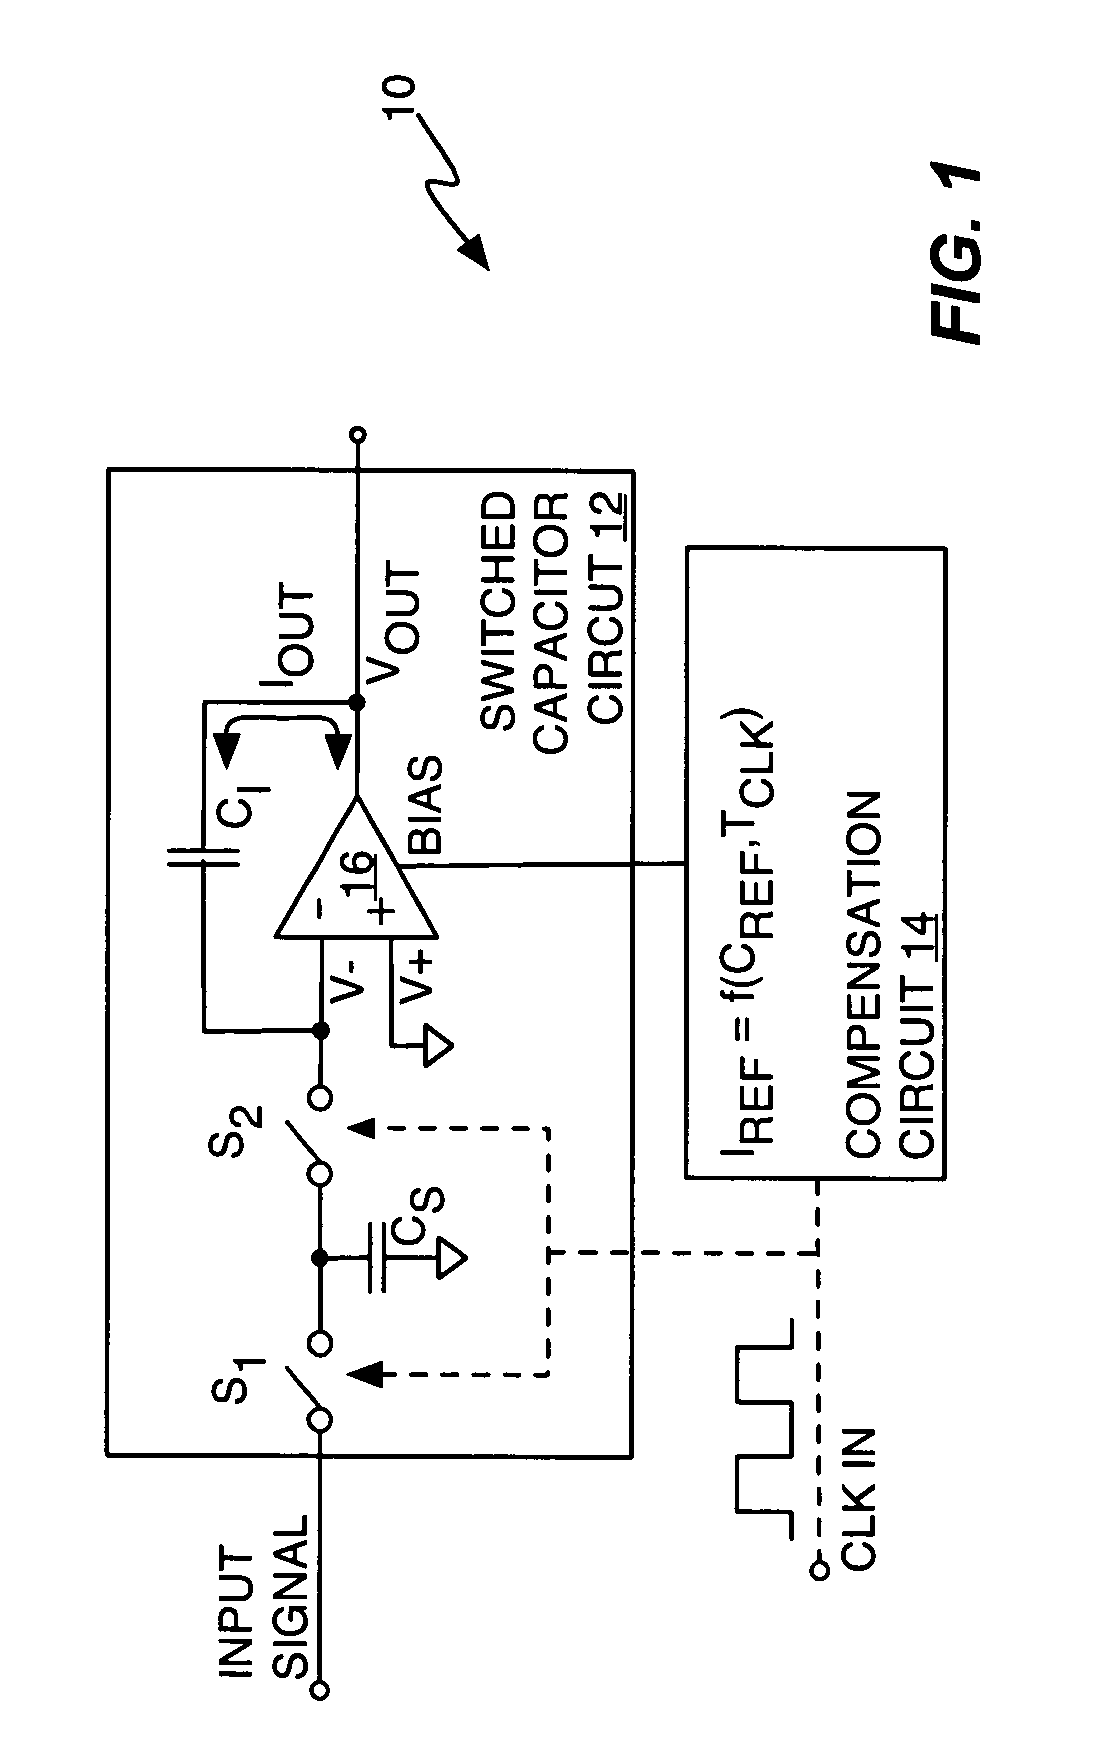 Switched capacitor circuit compensation apparatus and method